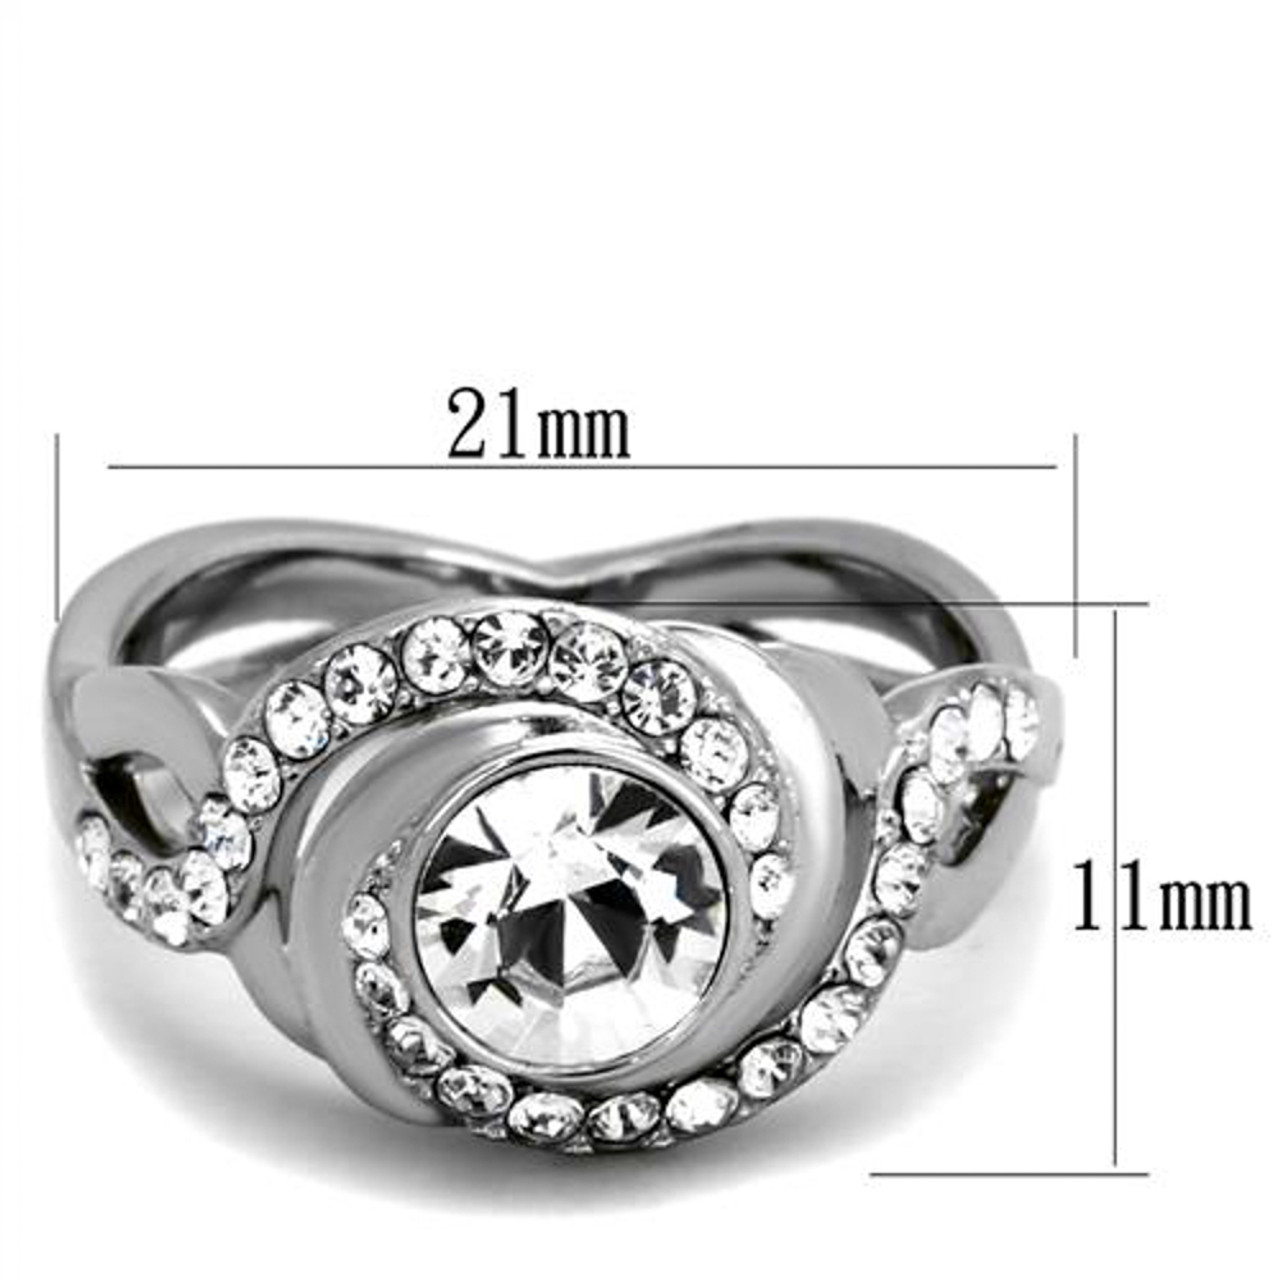 ARTK2282 Stainless Steel 1.65 Ct Round Cut AAA Cz Black Engagement Ring  Women's Size 5-10 